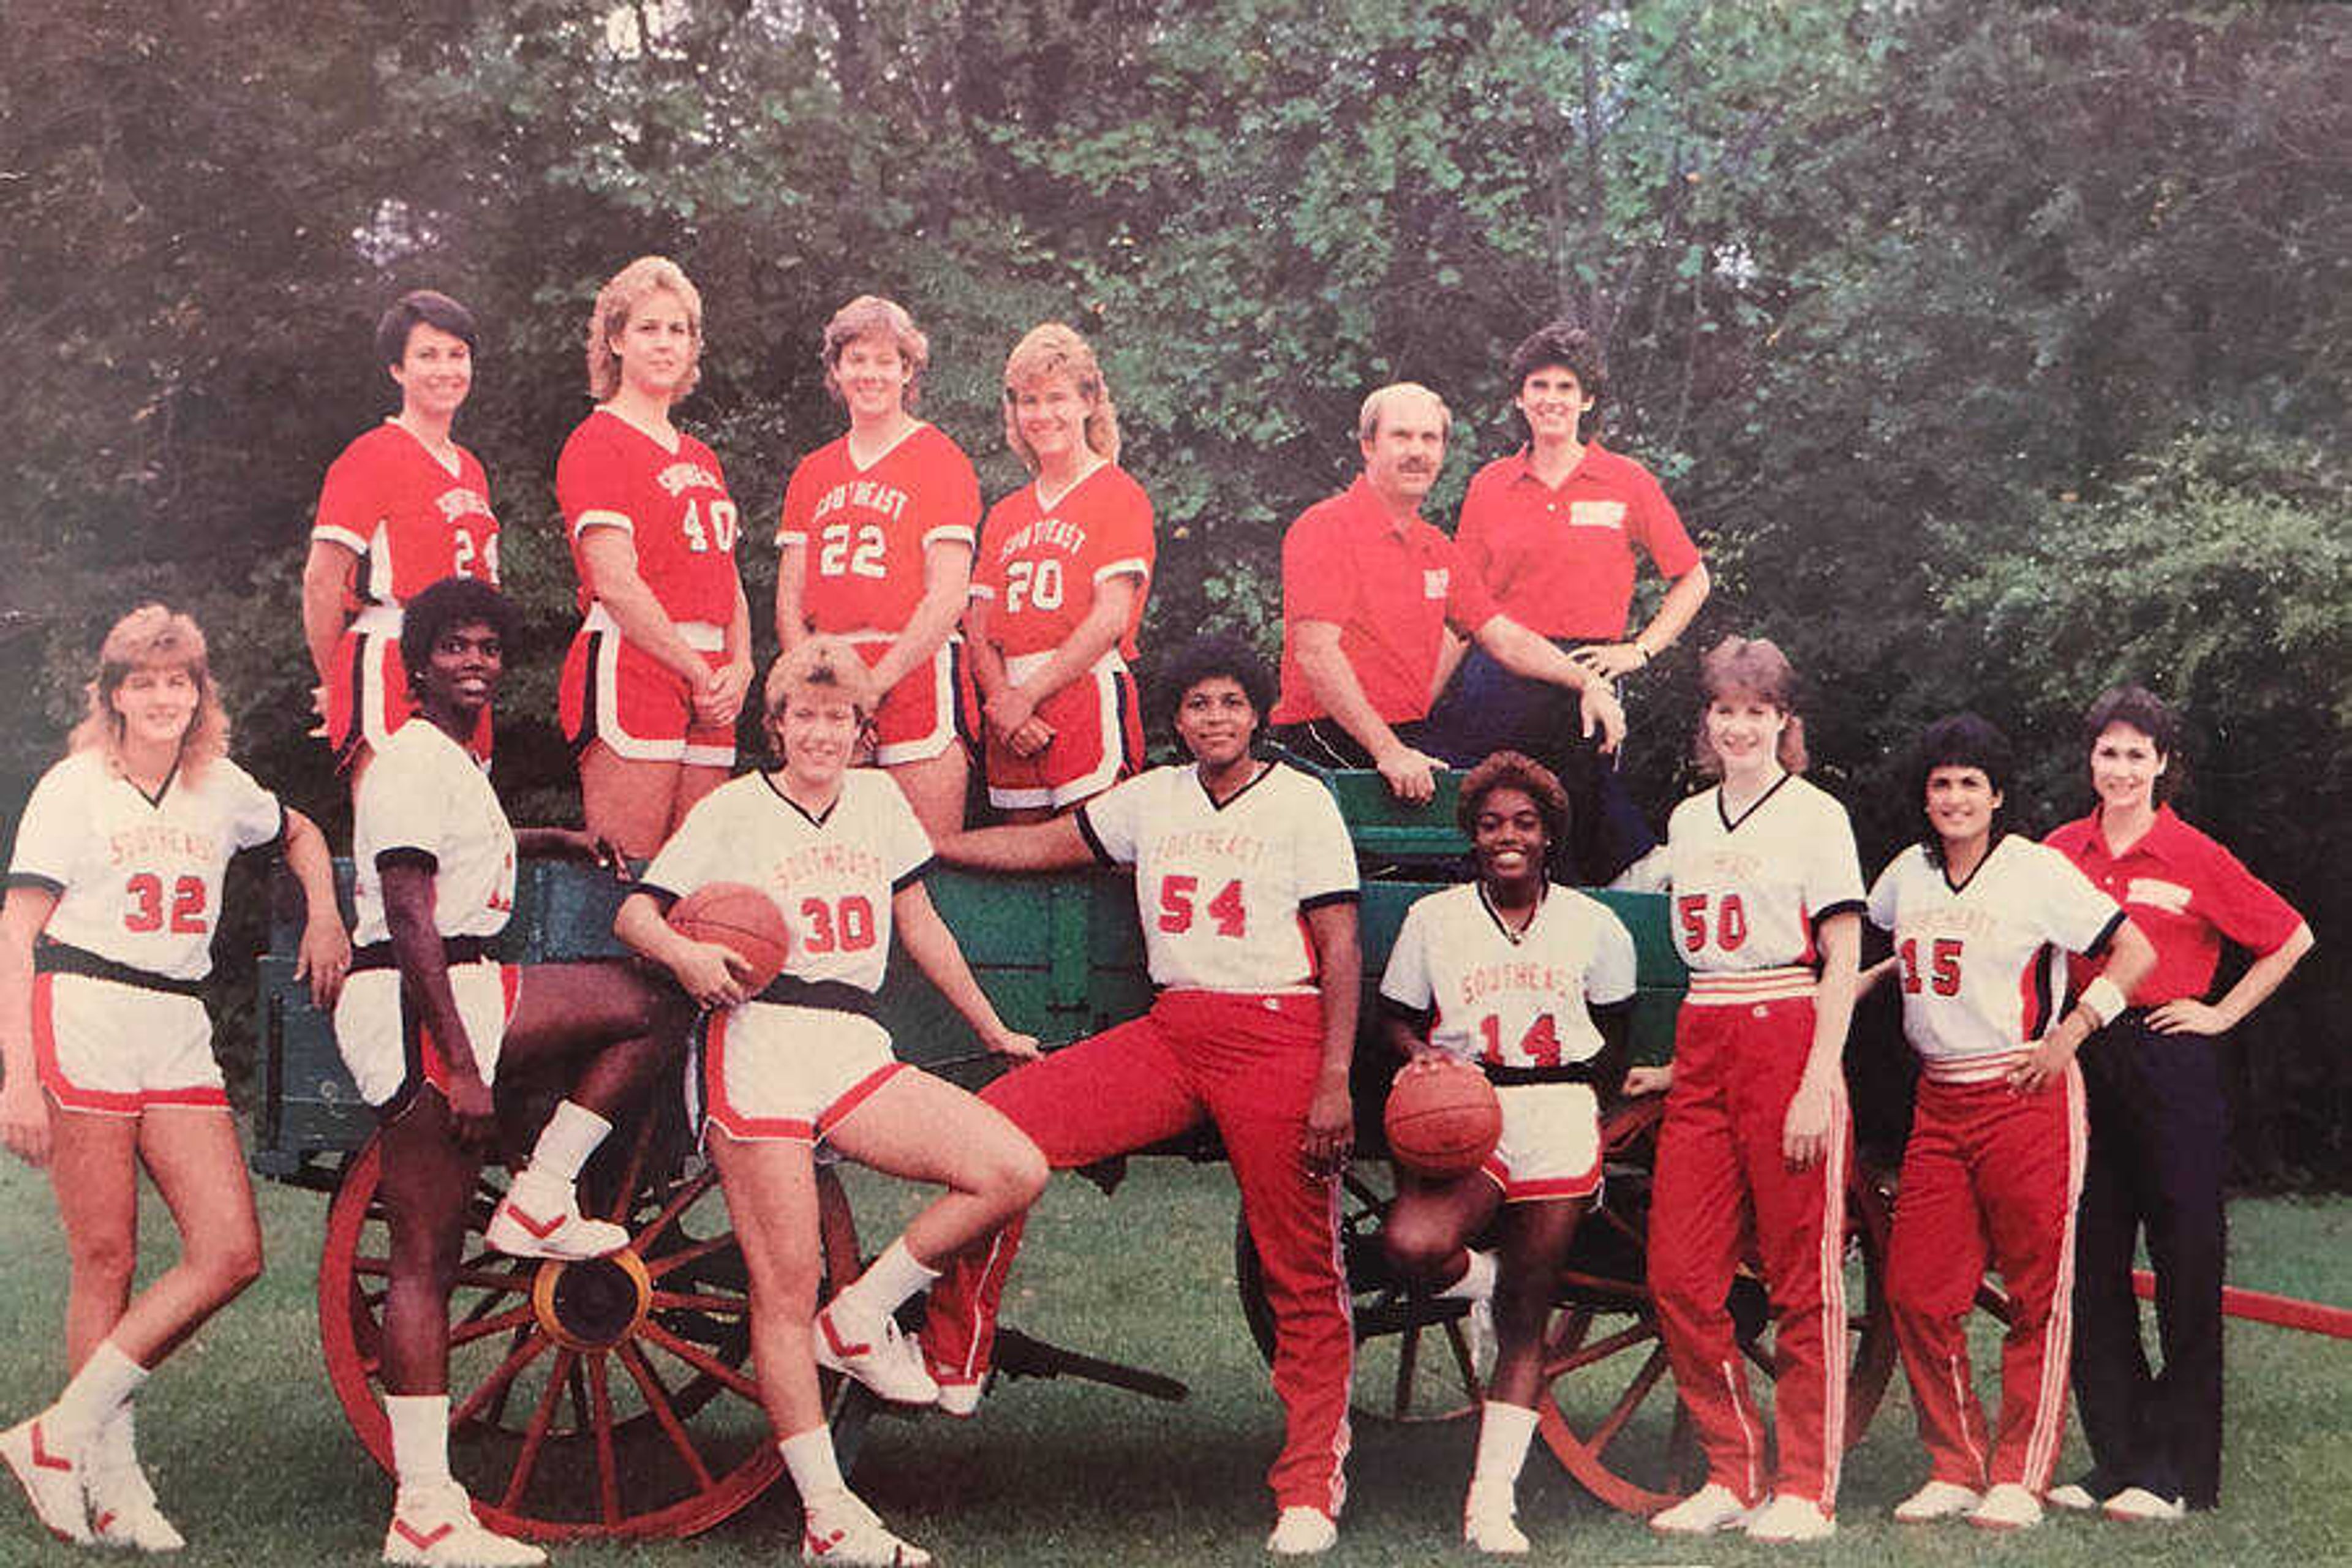 The members of the 1986-87 women’s basketball team pose for a team photo.